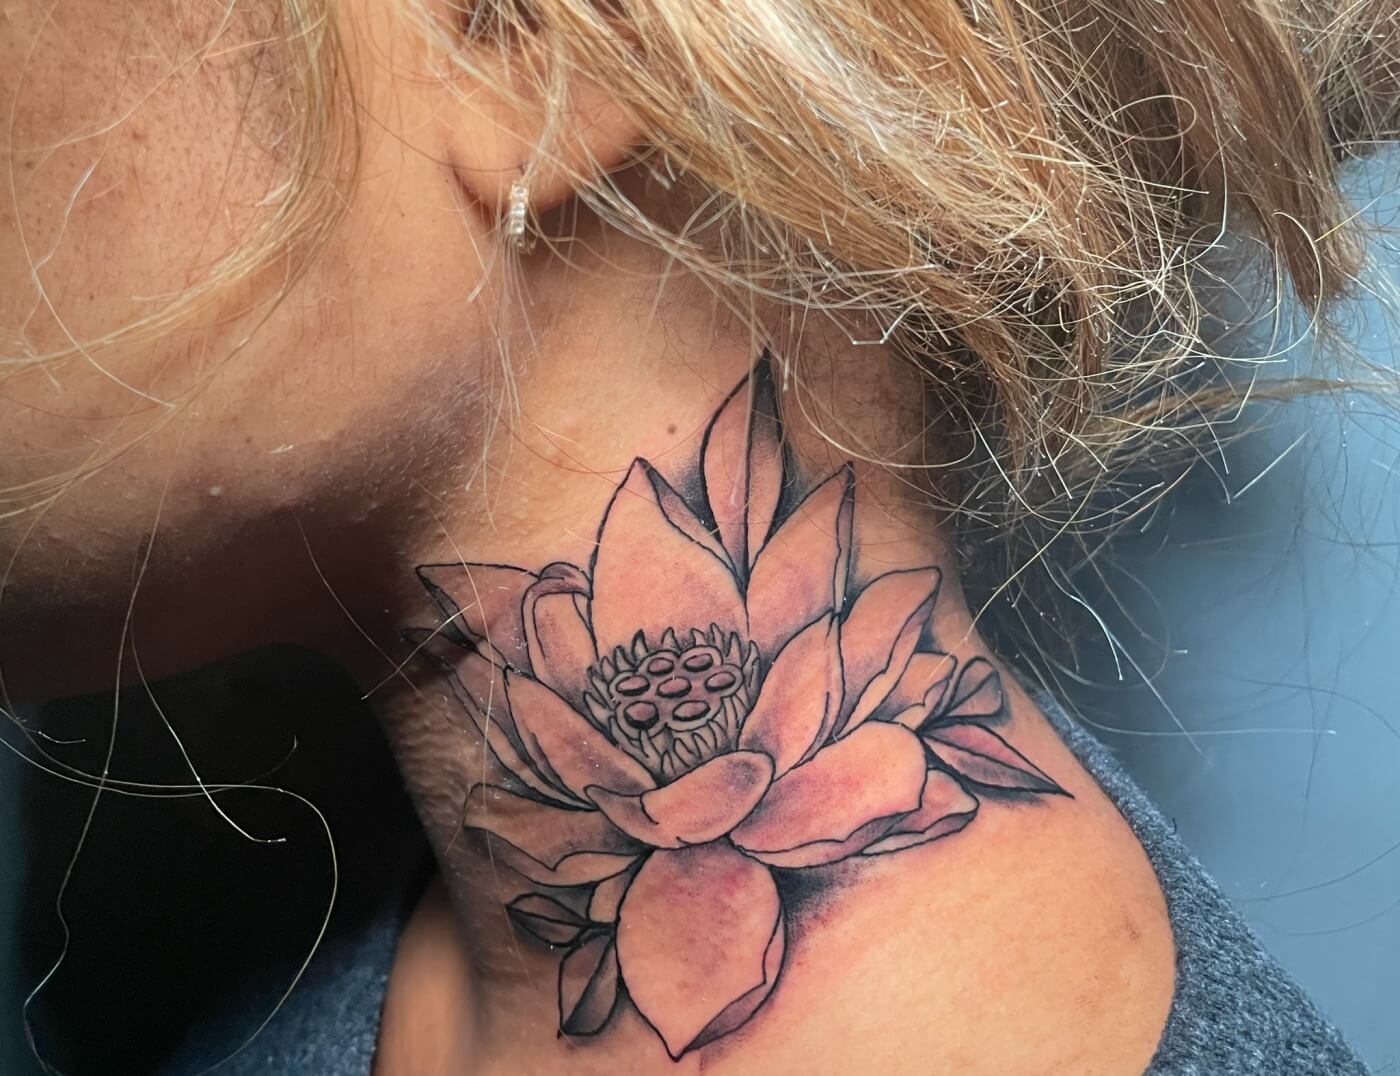 Lotus Flower Tattoo By Lyric TheArtist At Iron Palm Tattoos in south downtown Atlanta. Open until 2AM. We're Atlanta's only late night tattoo shop. Call 404-973-7828 or stop by for a free consultation. Walk ins are welcome.